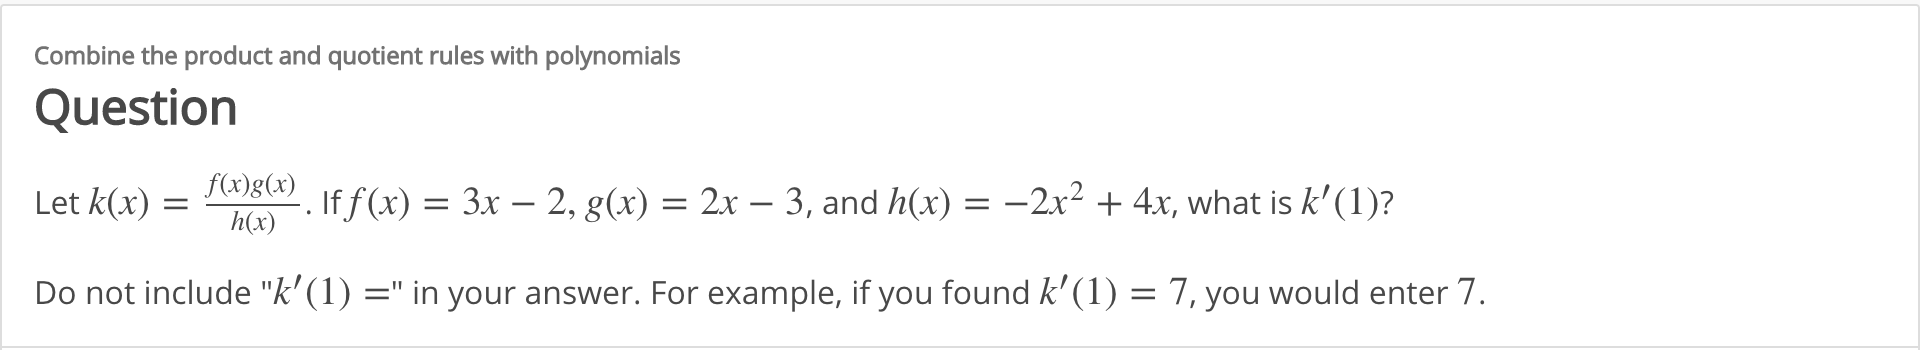 Combine the product and quotient rules with polynomials
Question
f(x)g(x)
If f (x) = 3x – 2, g(x) = 2x – 3, and h(x) = -2x² + 4x, what is k'(1)?
h(x)
Let k(x)
Do not include "k' (1) =" in your answer. For example, if you found k' (1) = 7, you would enter 7.
